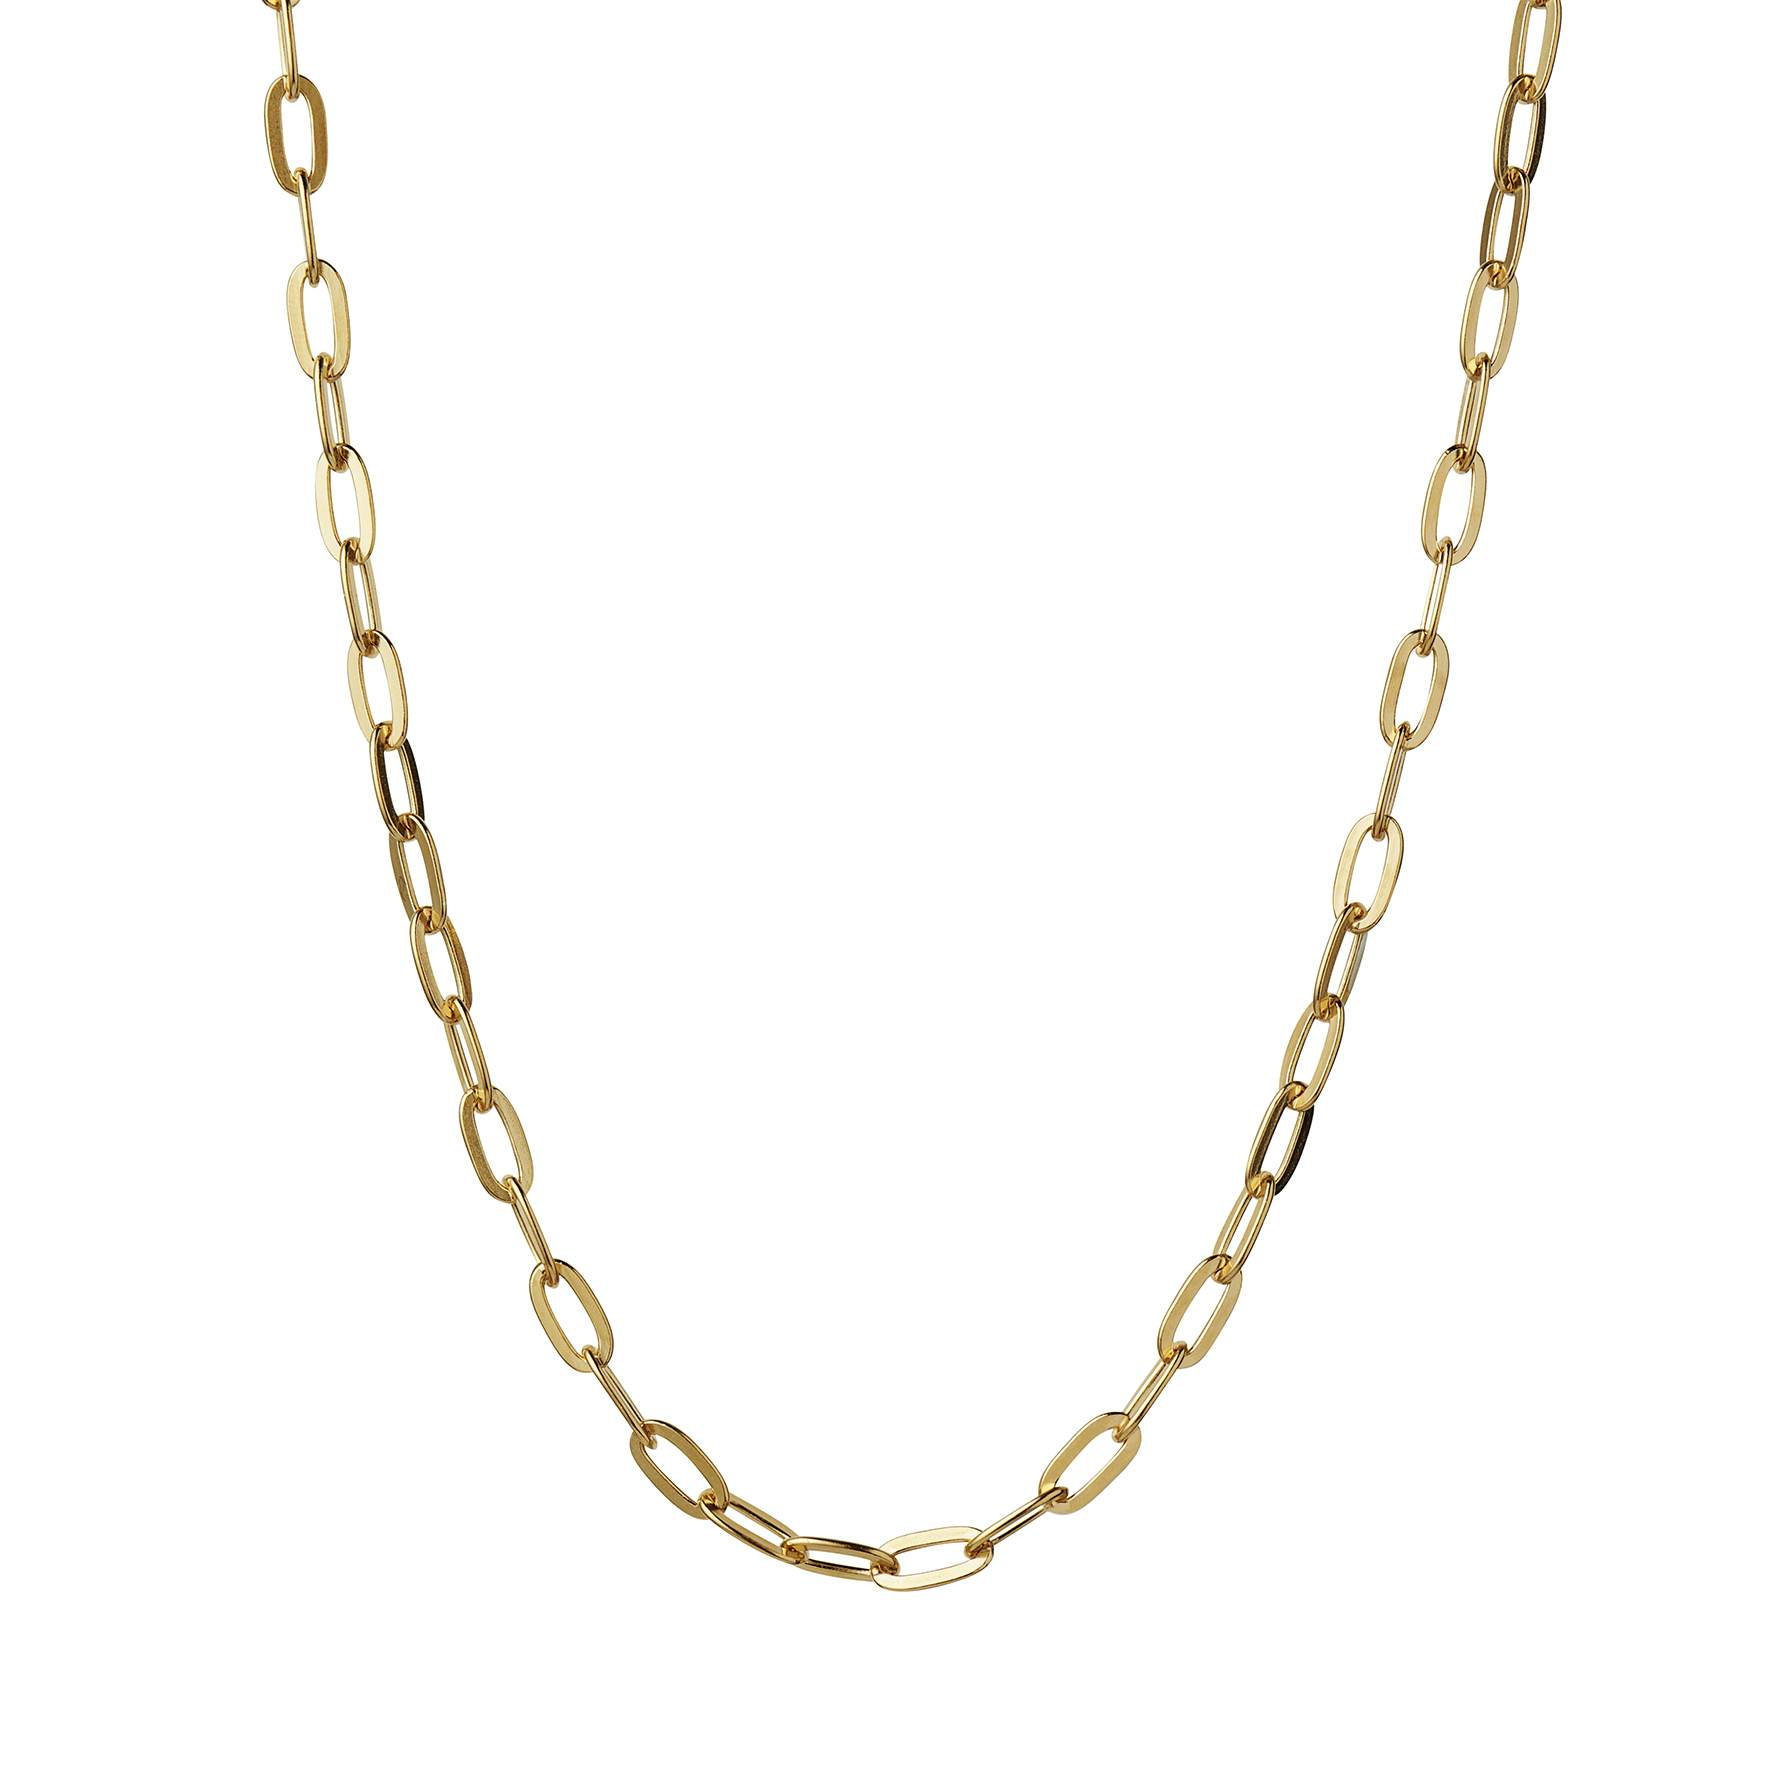 Chunky Pendant Chain from STINE A Jewelry in Goldplated-Silver Sterling 925